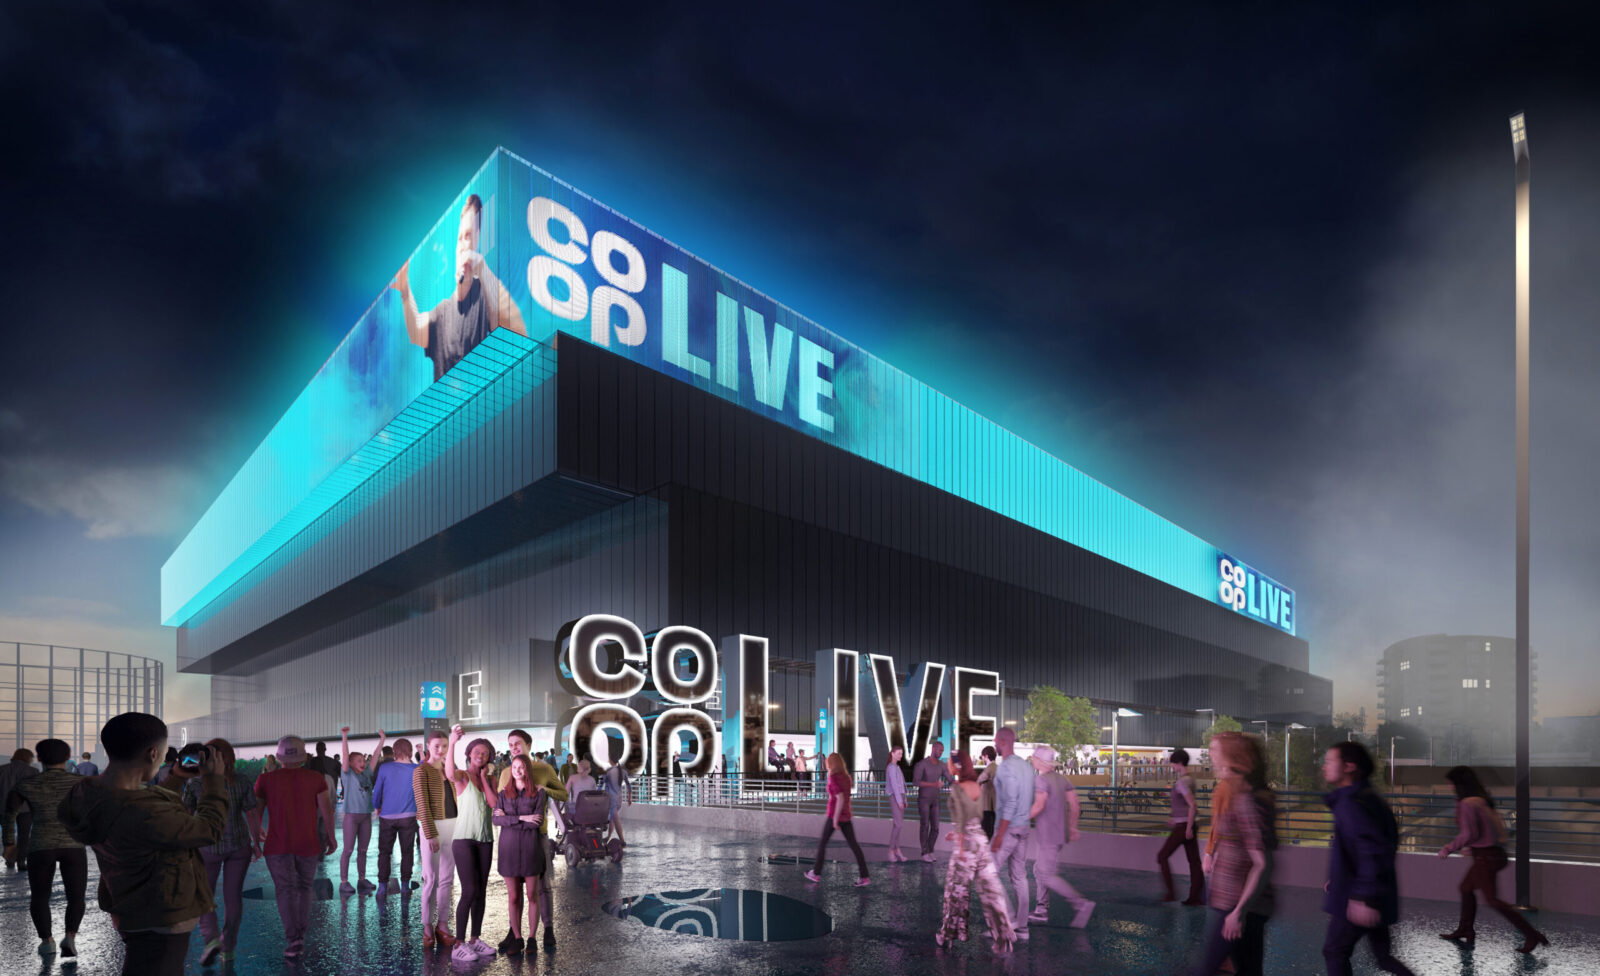 Co-op Live has announced 2000 new jobs